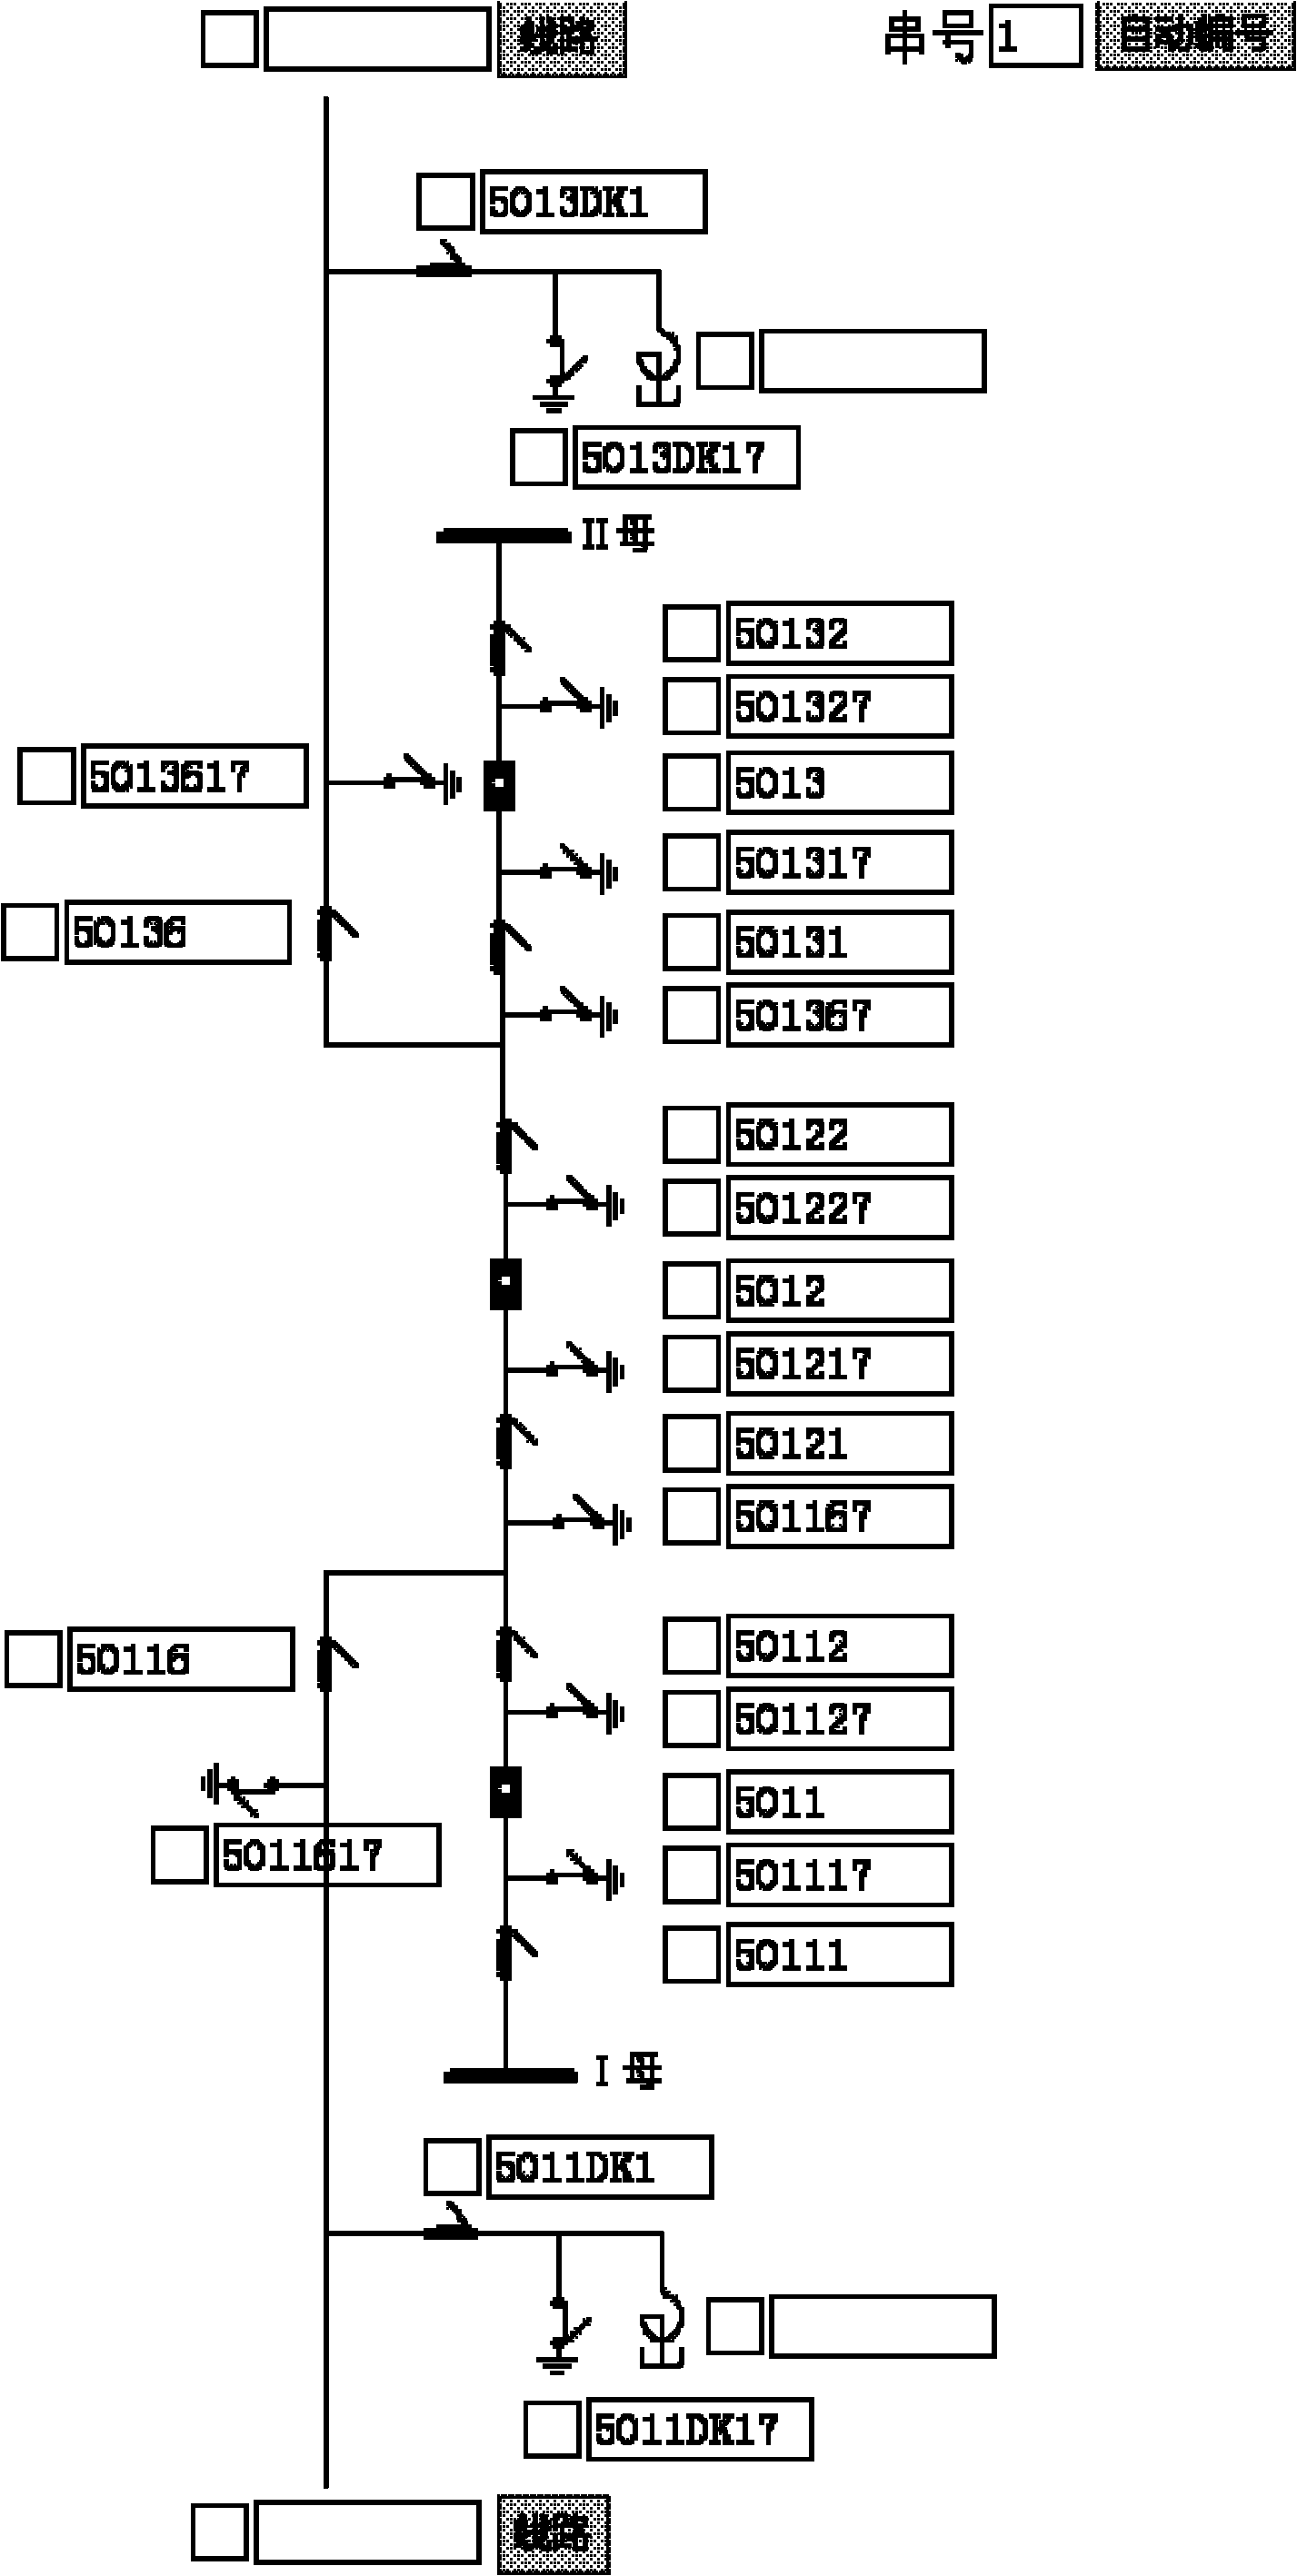 Automatic generating method of electric network station wiring diagram